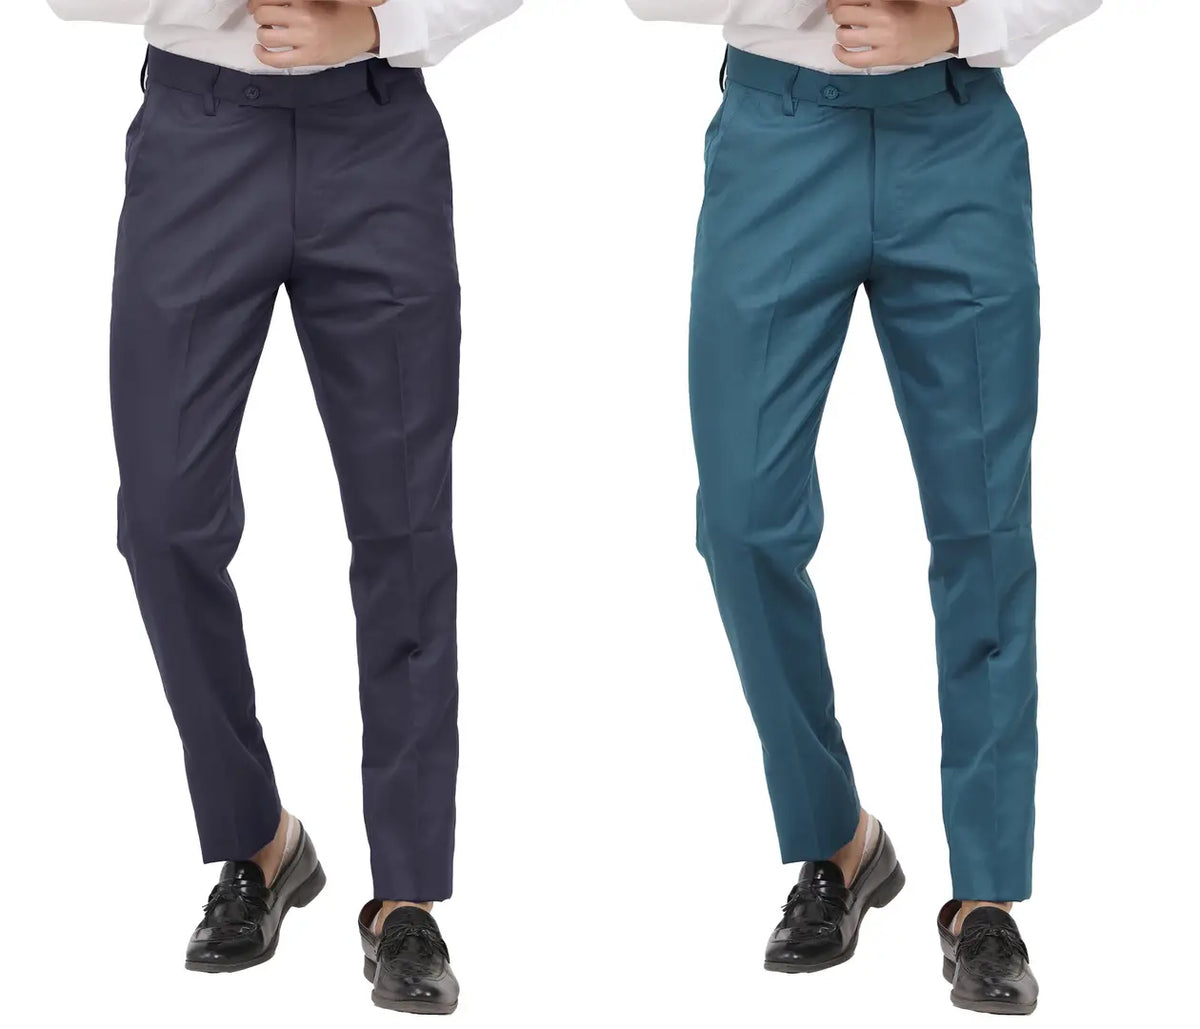 Kundan Men Poly-Viscose Blended Dark Grey and Morpich Blue Formal Trousers ( Pack of 2 Trousers )